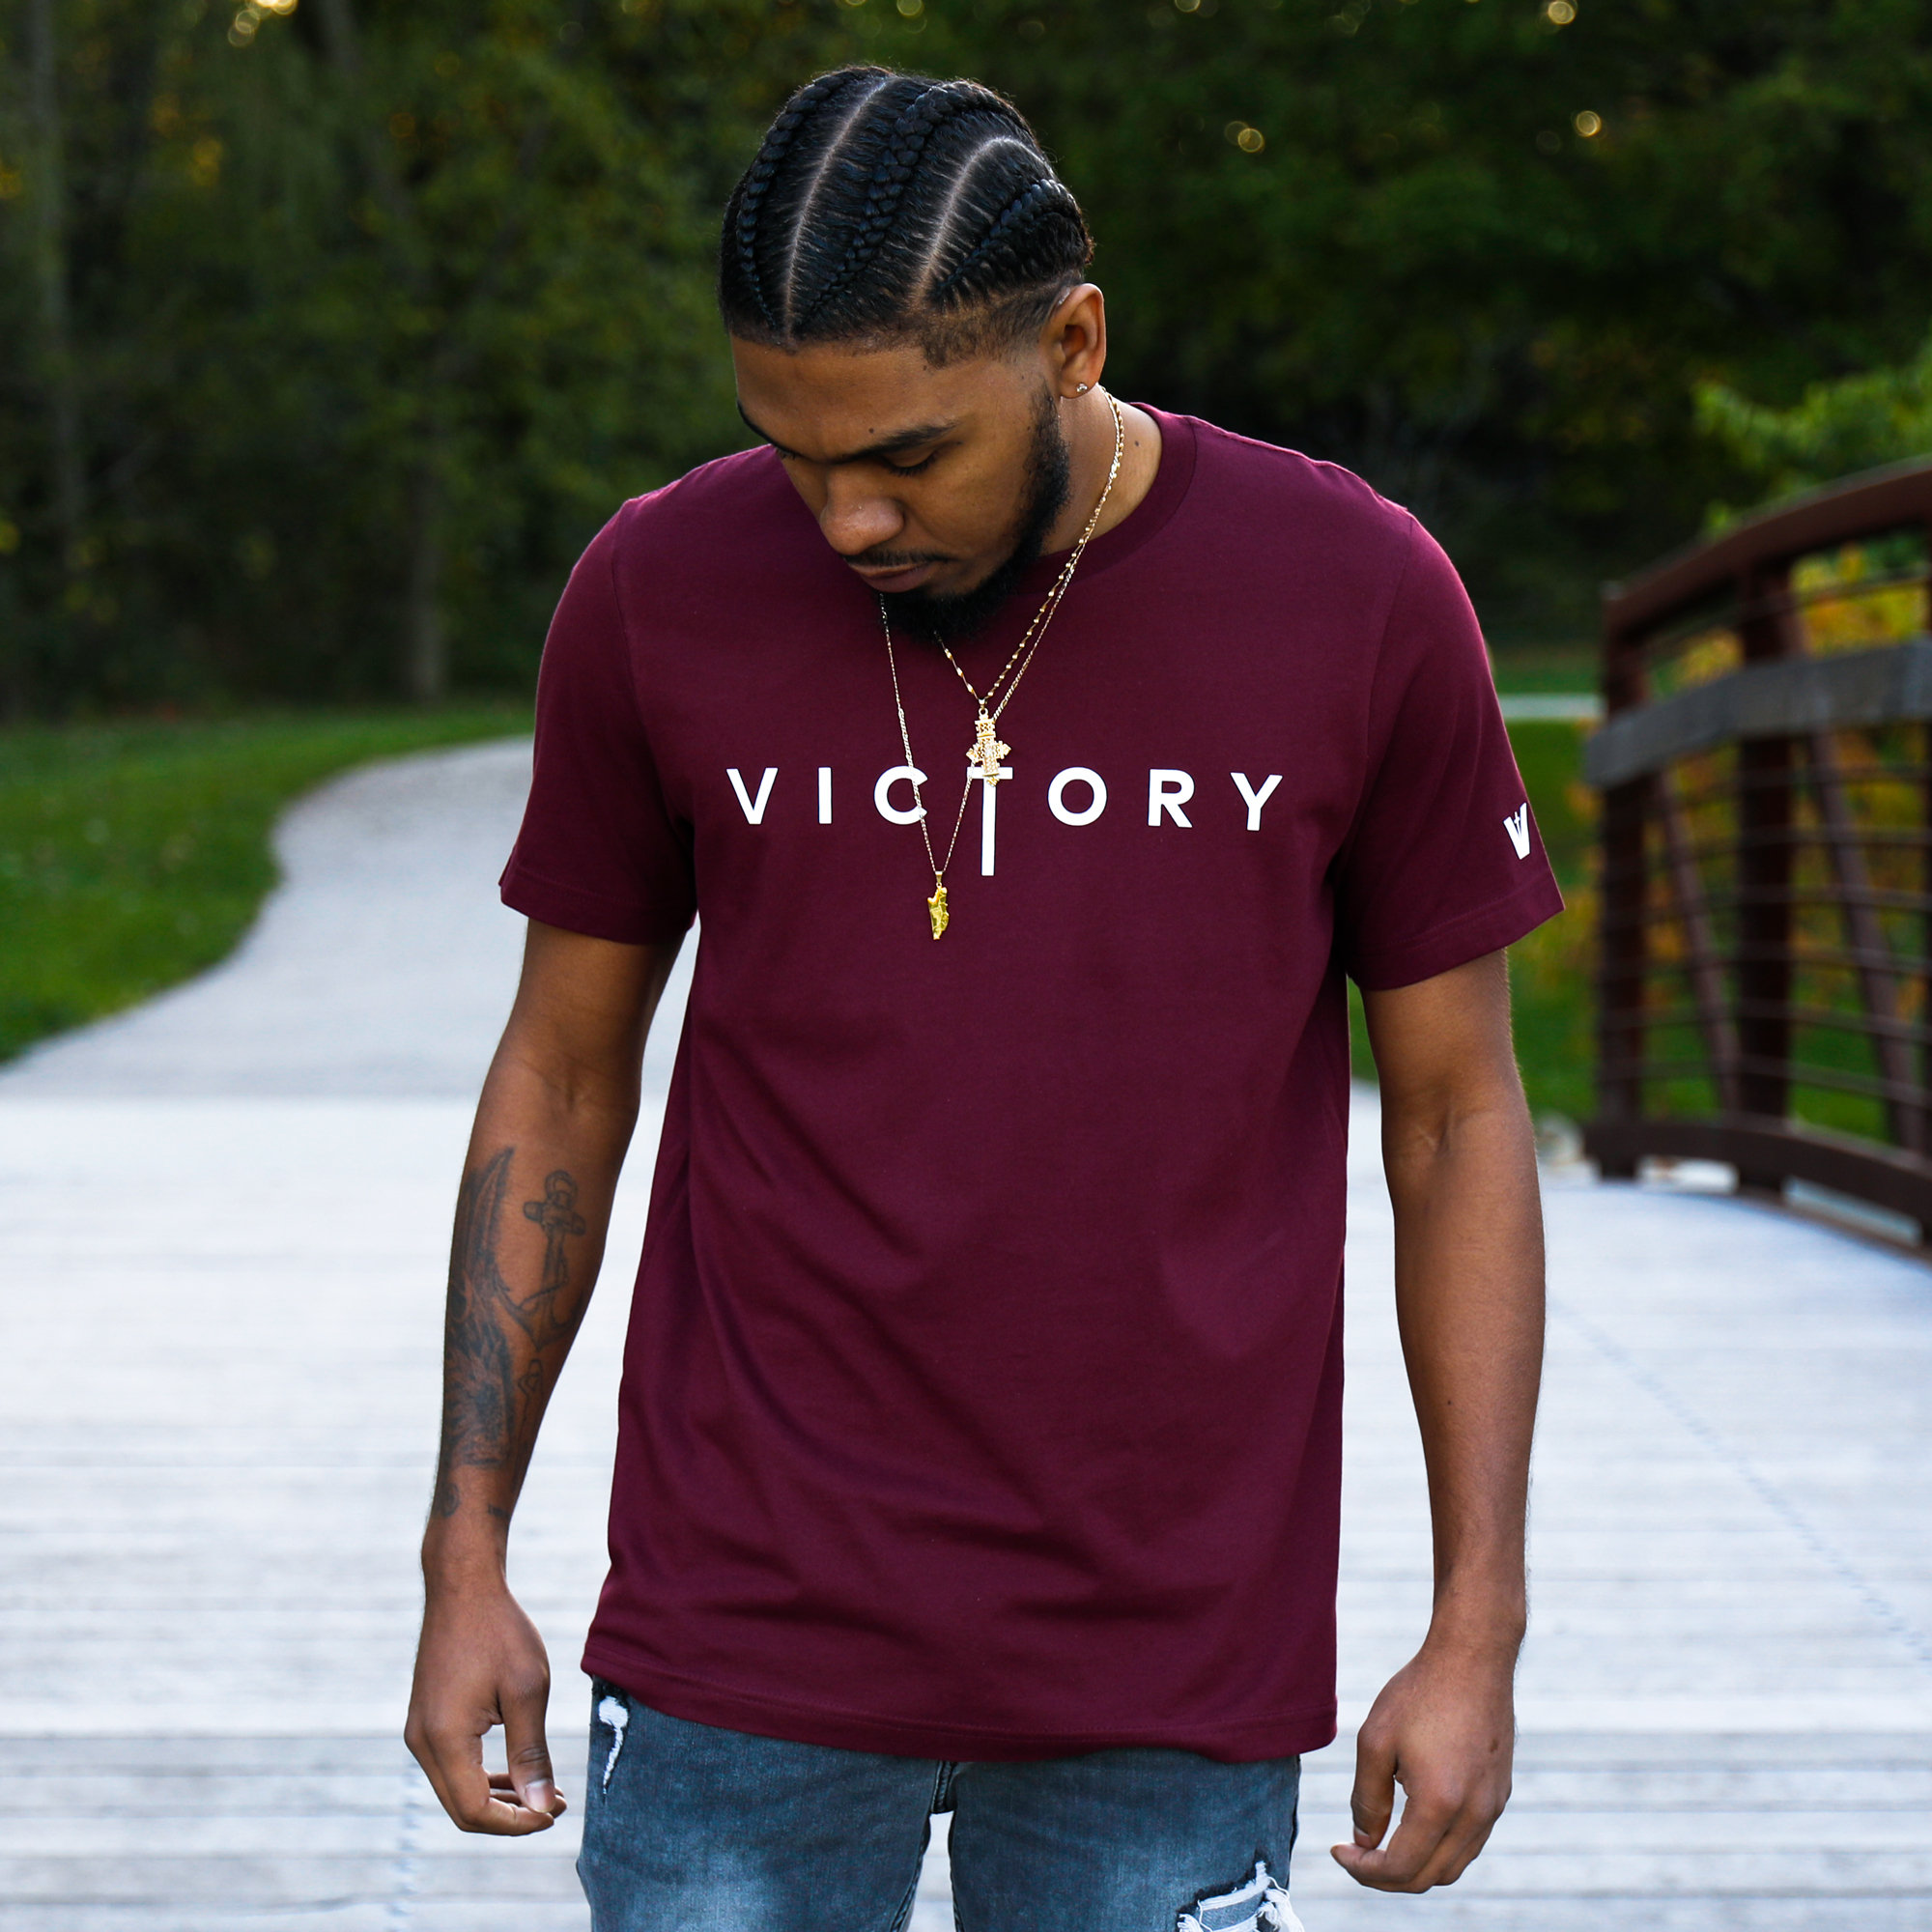 Christian T Maroon Victory T-shirt for Men - Etsy